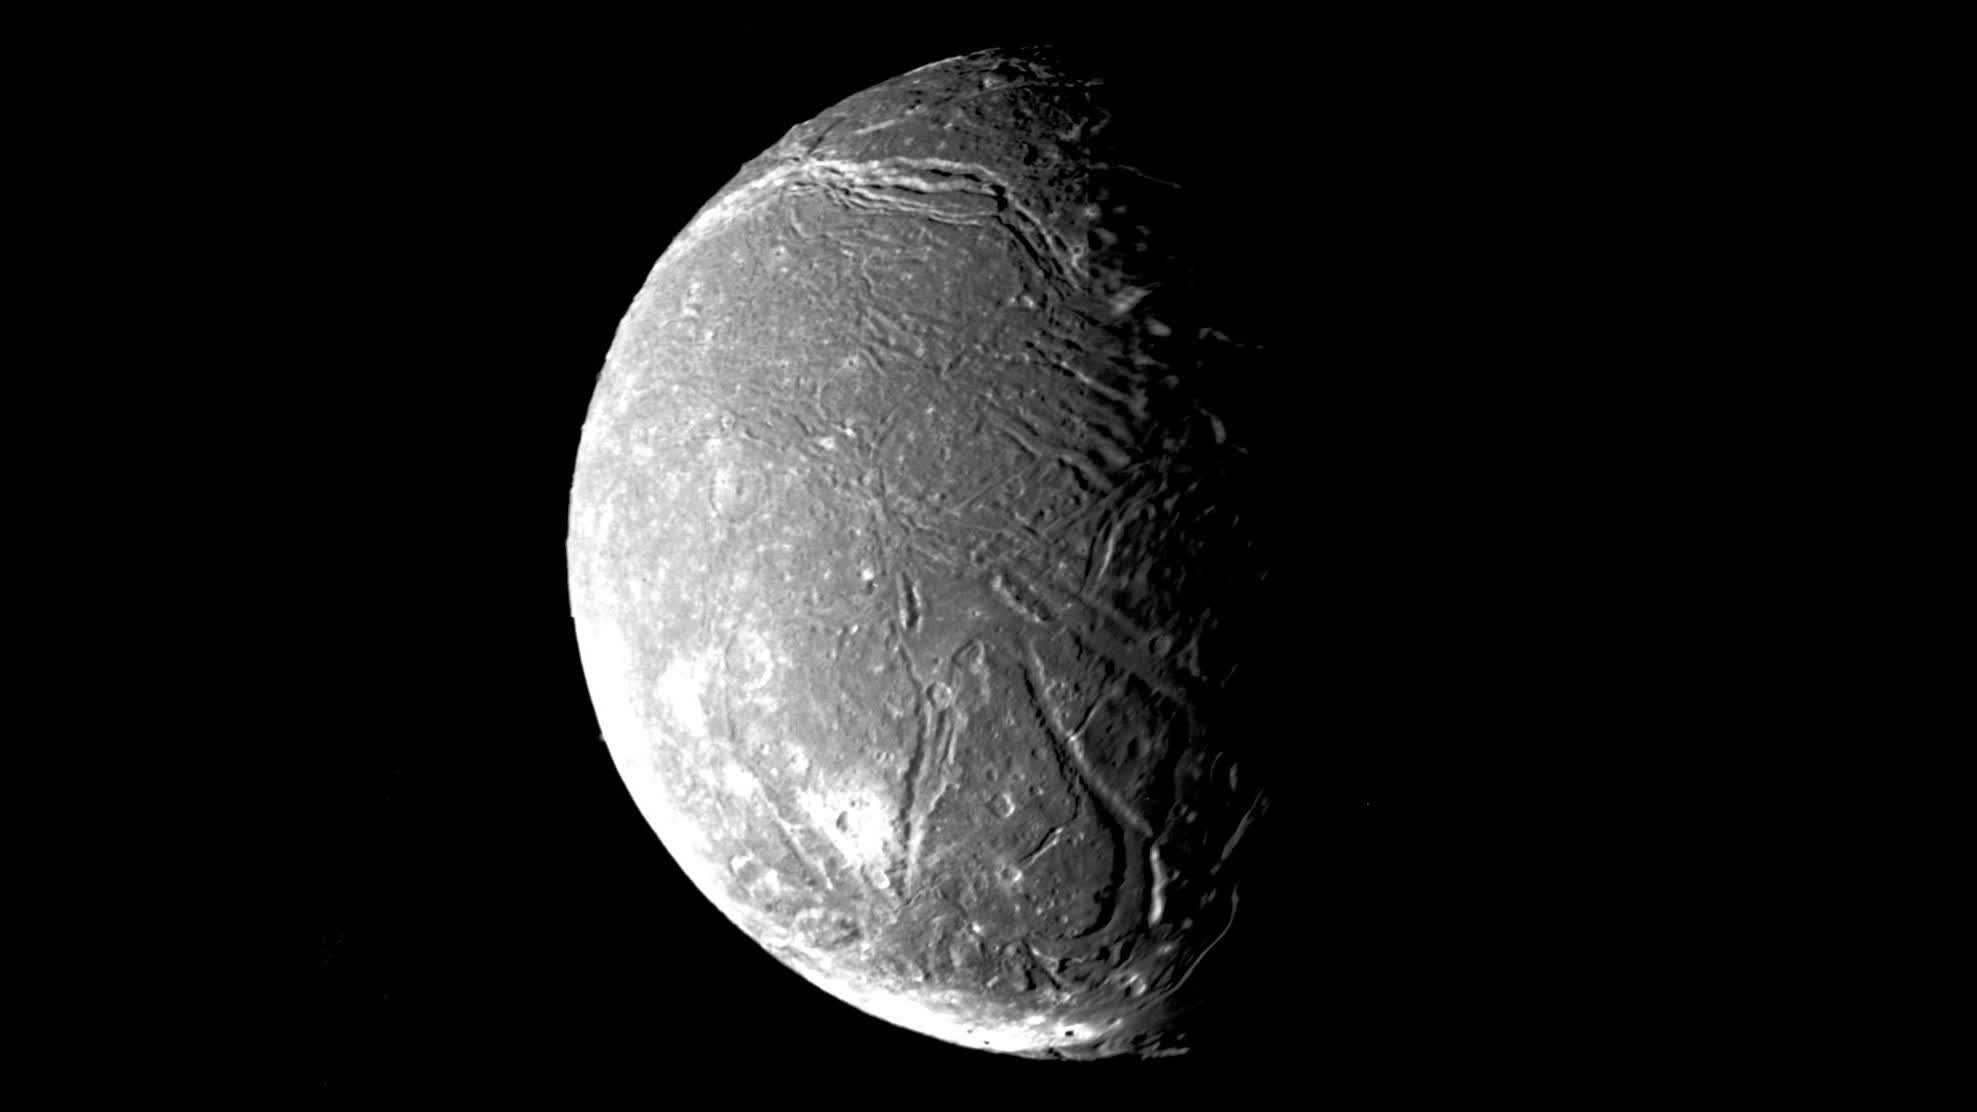 New analysis techniques reveal possible oceans on Uranus' moons